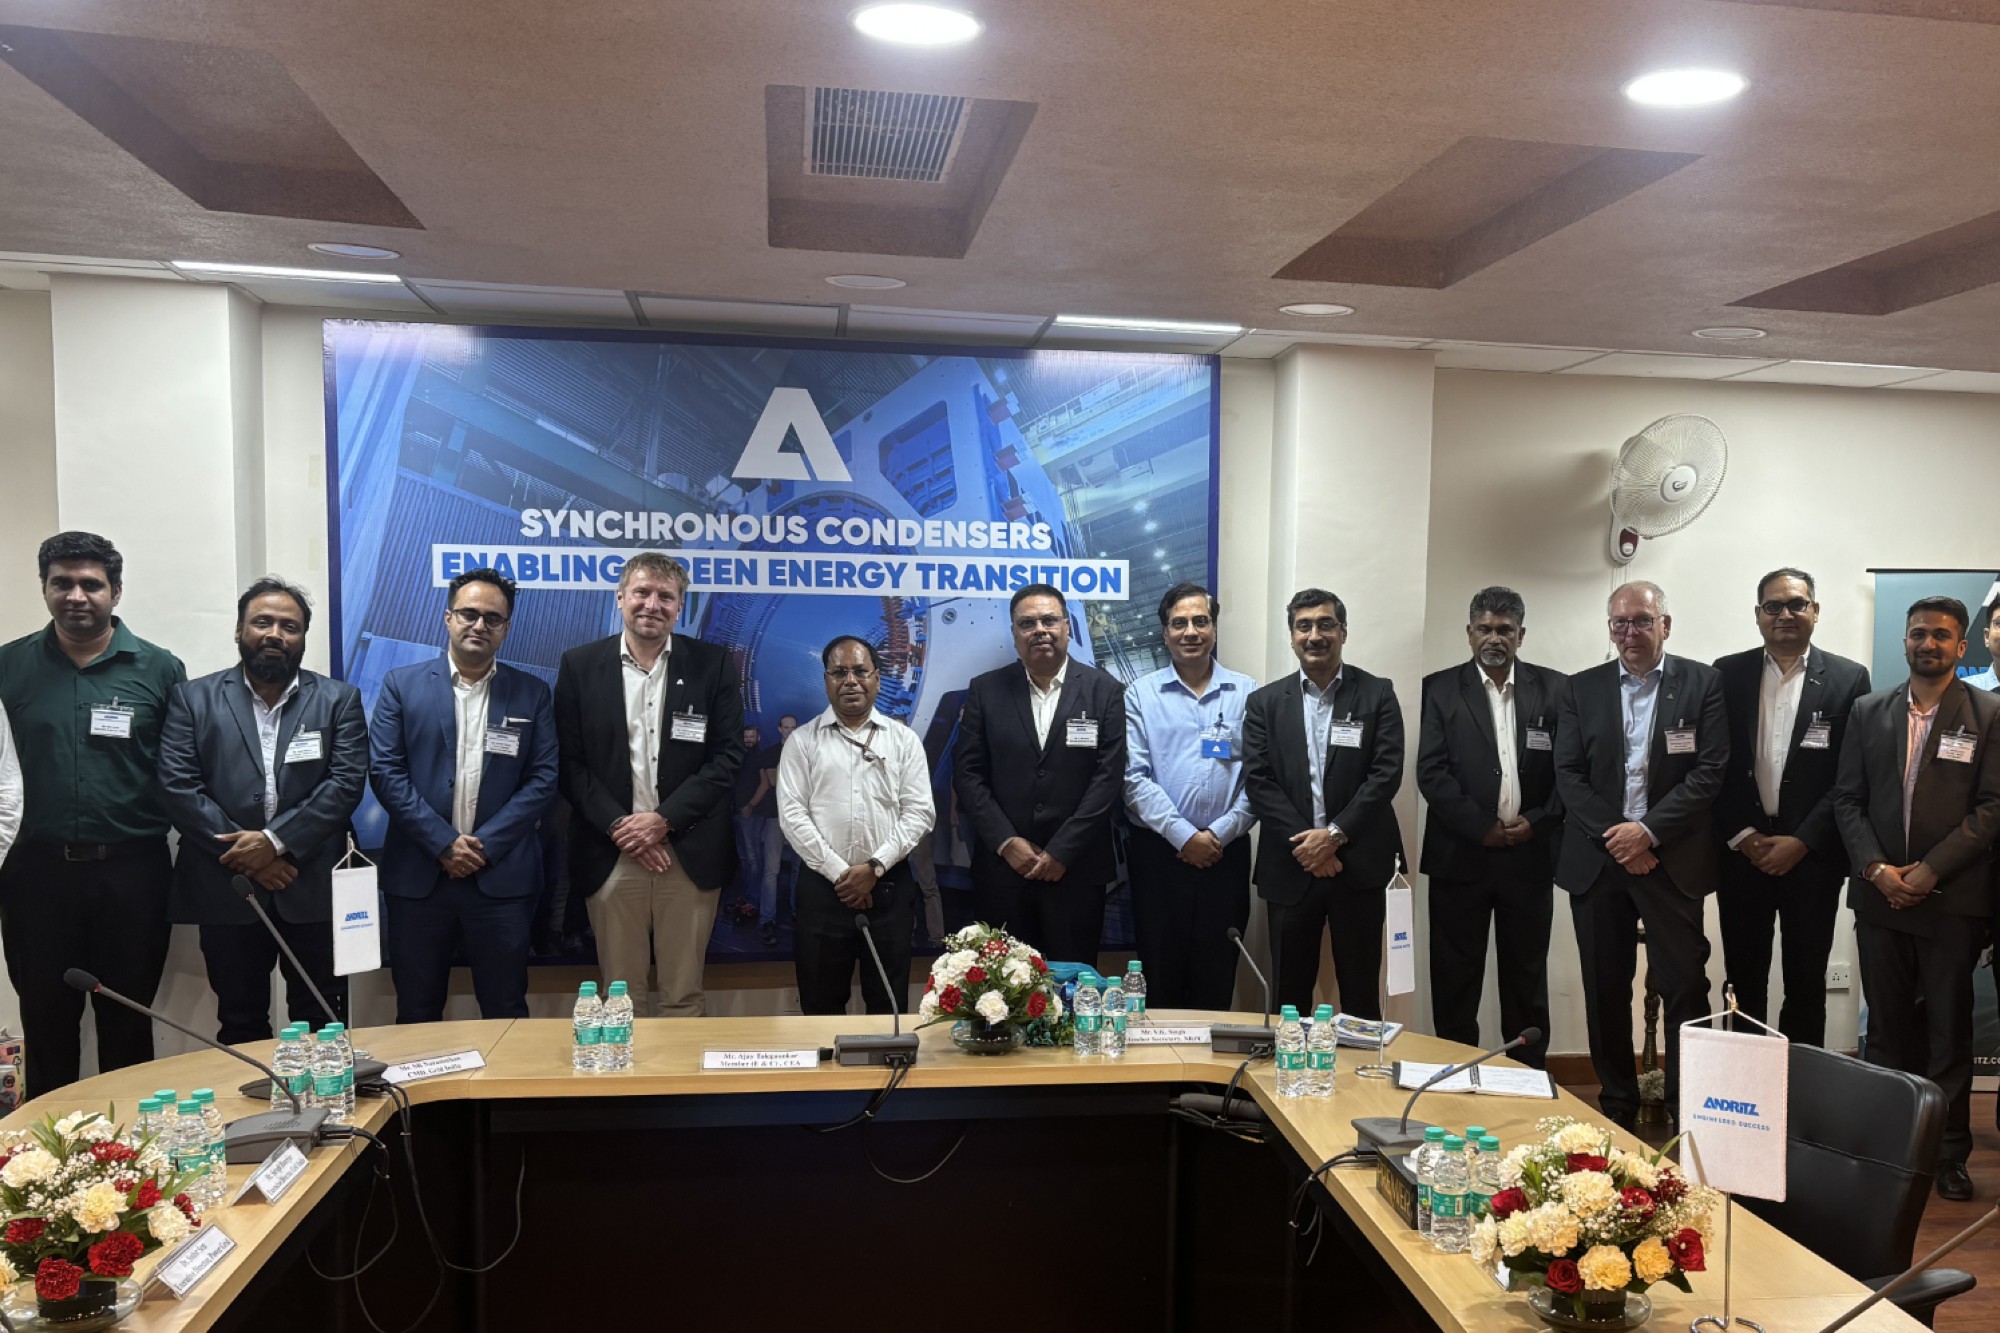 ANDRITZ launches synchronous condensers in India